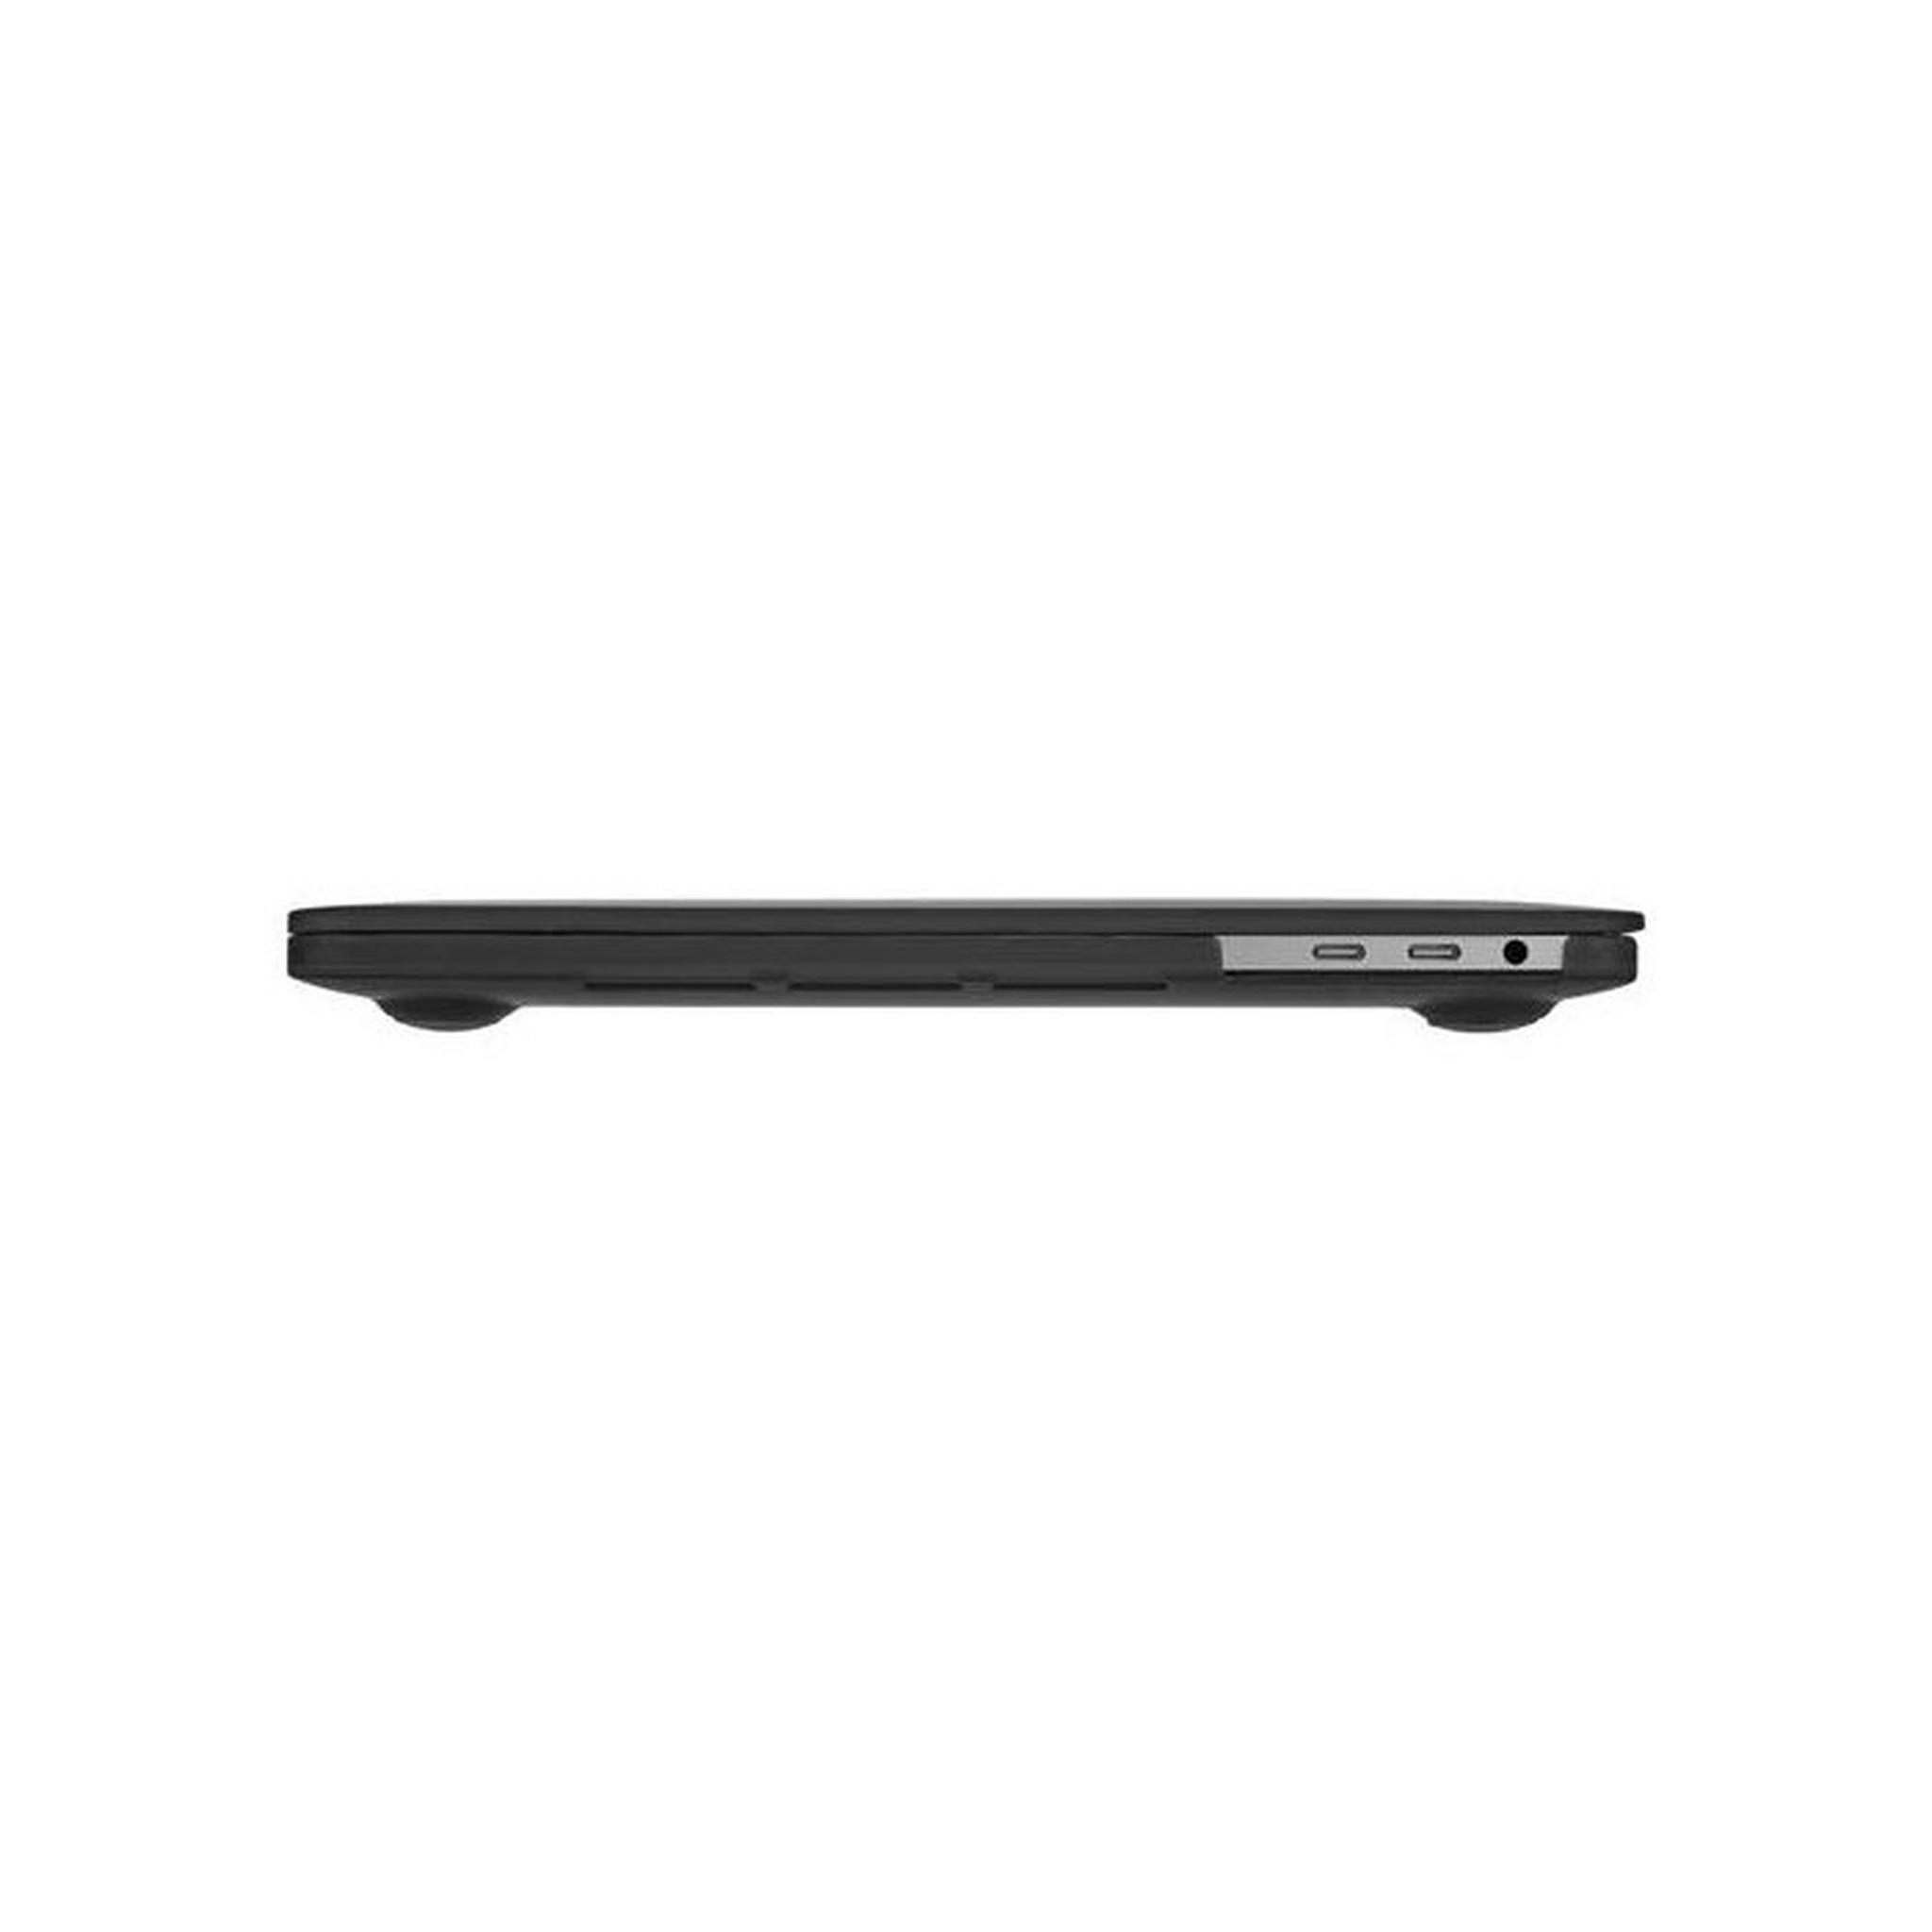 Case Mate Snap-On Case For Macbook AIR M2 2022 13-inch, CM-CM050010 - Smoke